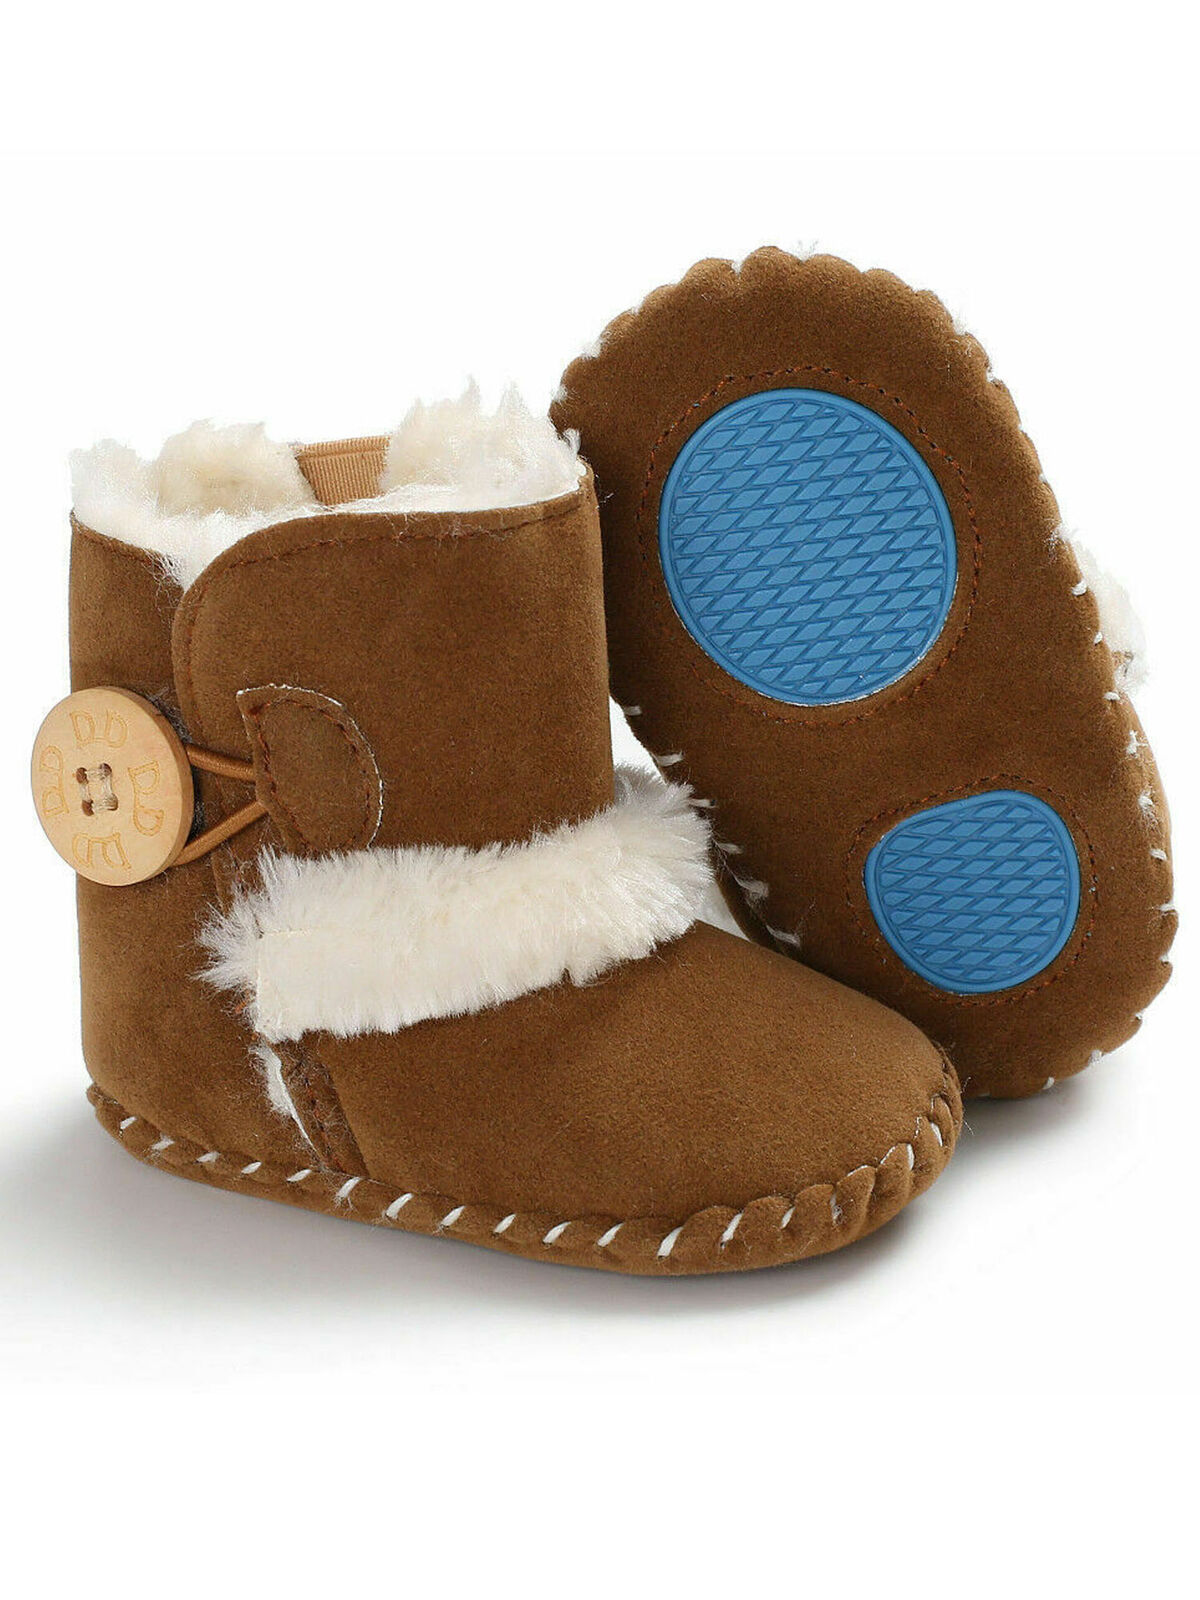 Baby Girl Boy Snow Boots Winter Half Boots Infant Kids New Soft Bottom Shoes - image 3 of 3